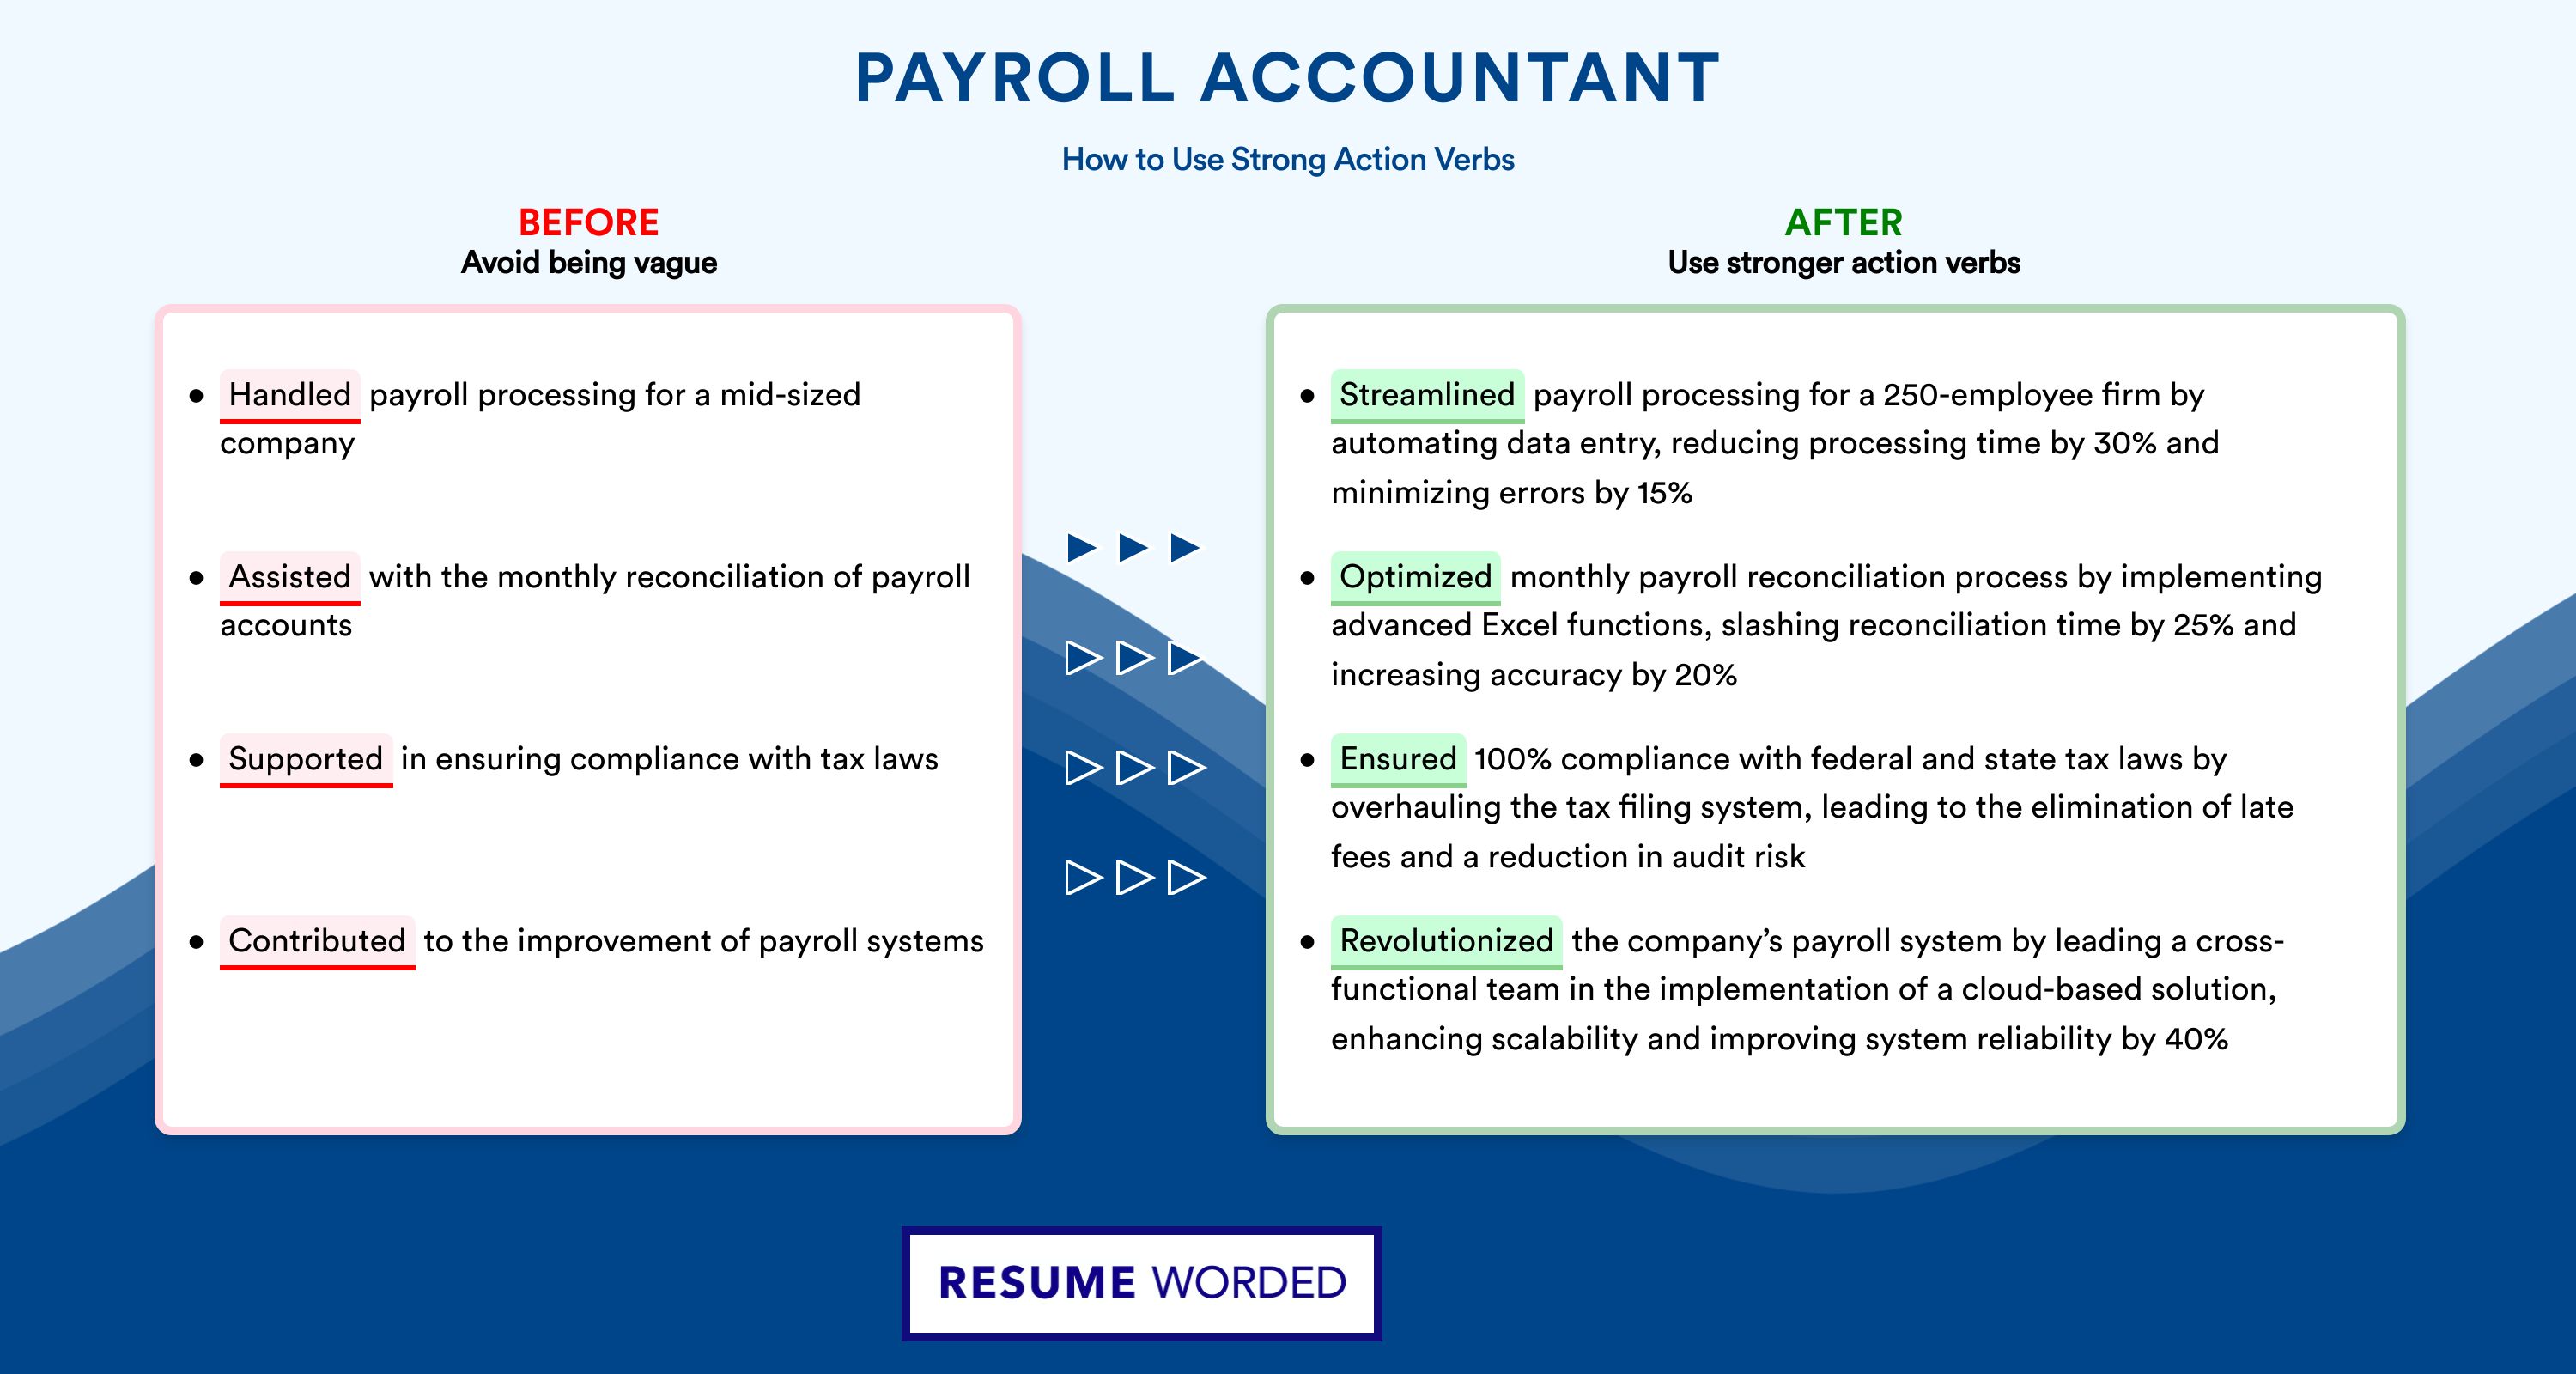 Action Verbs for Payroll Accountant